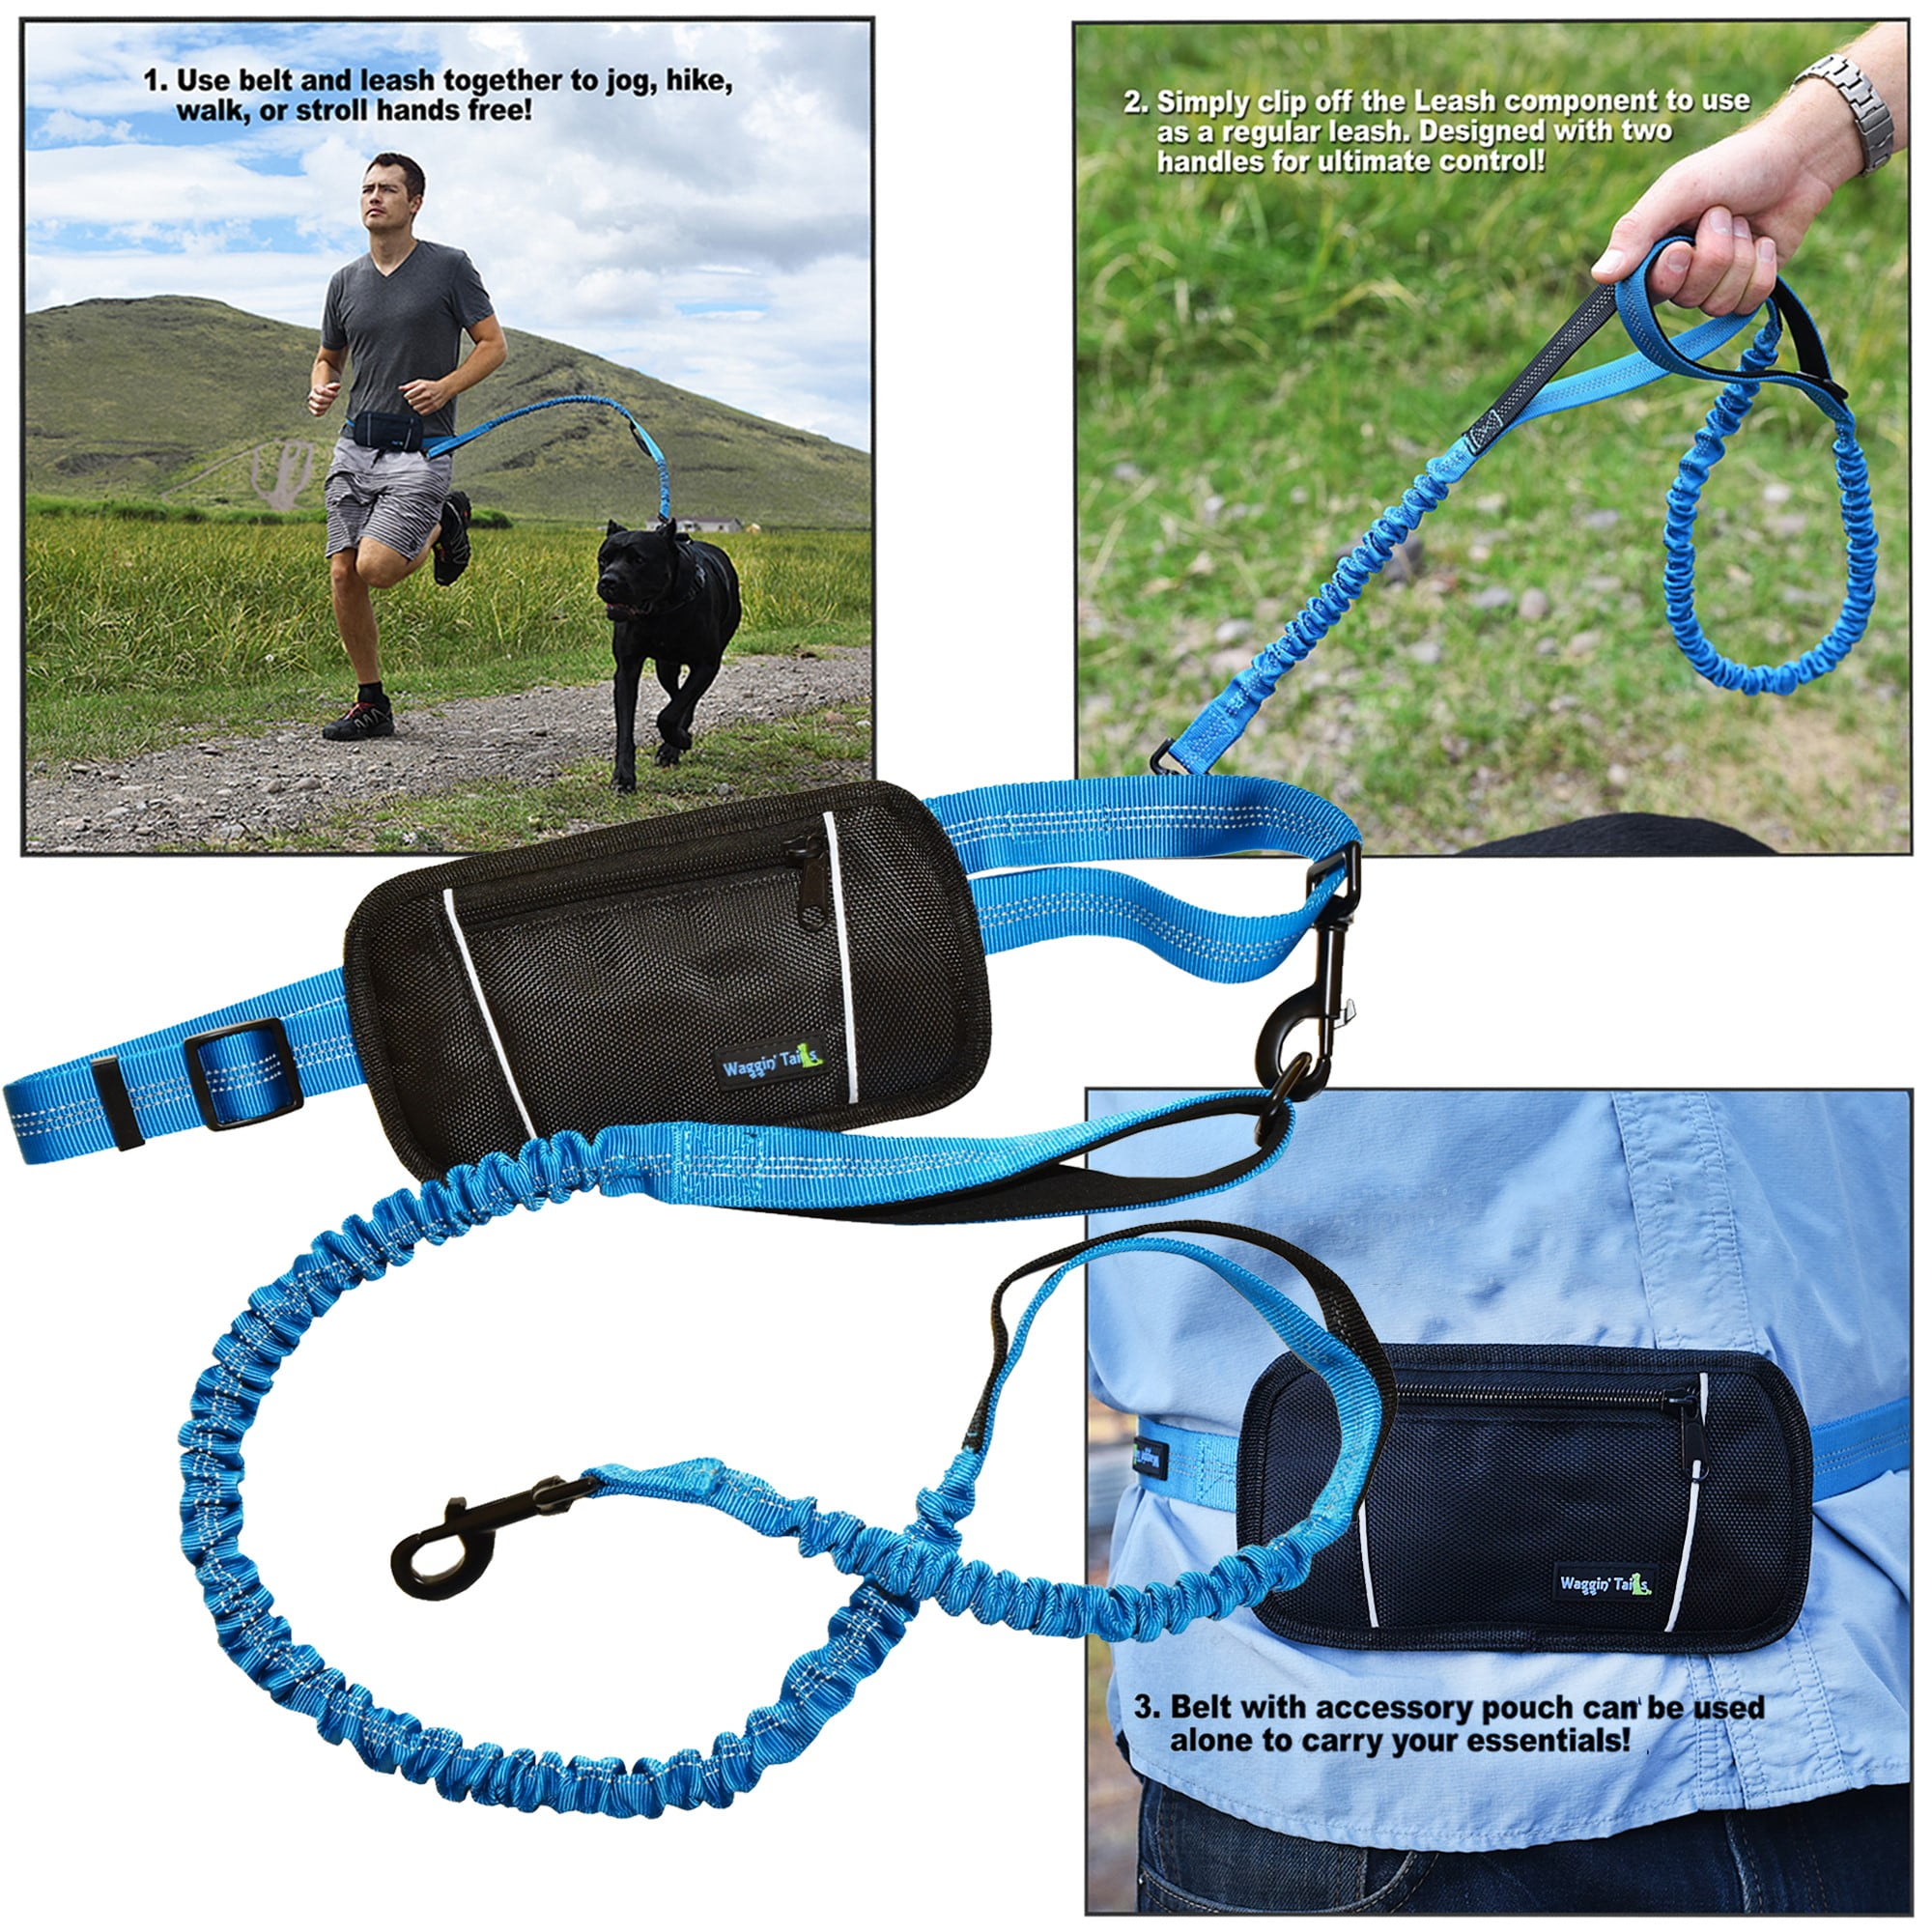 FURRY BUDDY Hands Free Dog Leash Fits All Waist Sizes from 28” to 48” Phone Pocket Water Bottle Holder Dog Walking Training Belt Shock Absorbing Bungee Leash up to 180lbs Large Dogs 